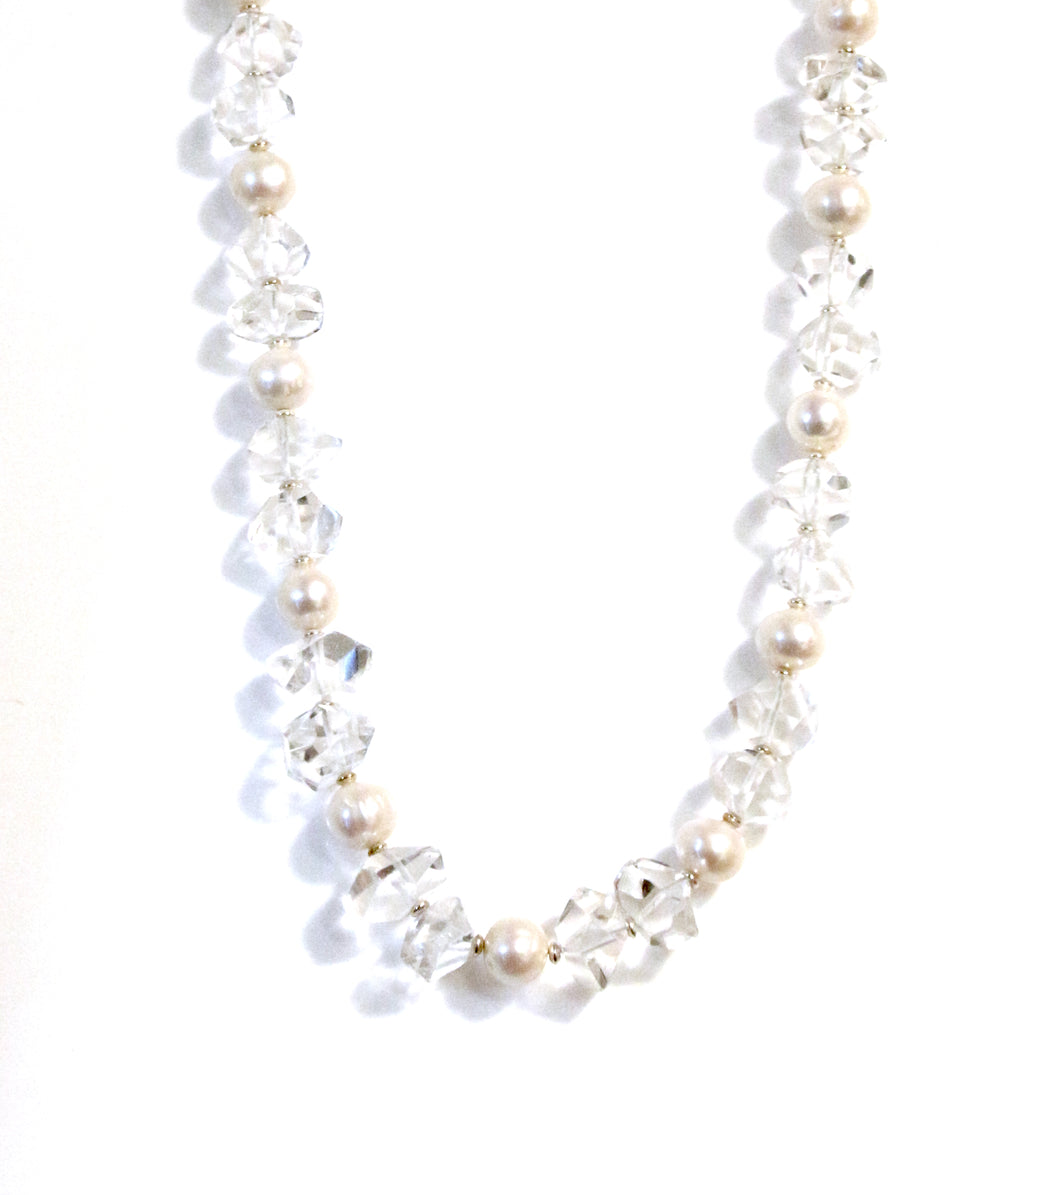 Australian Handmade Crystal Quartz Facetted Necklace with Pearls